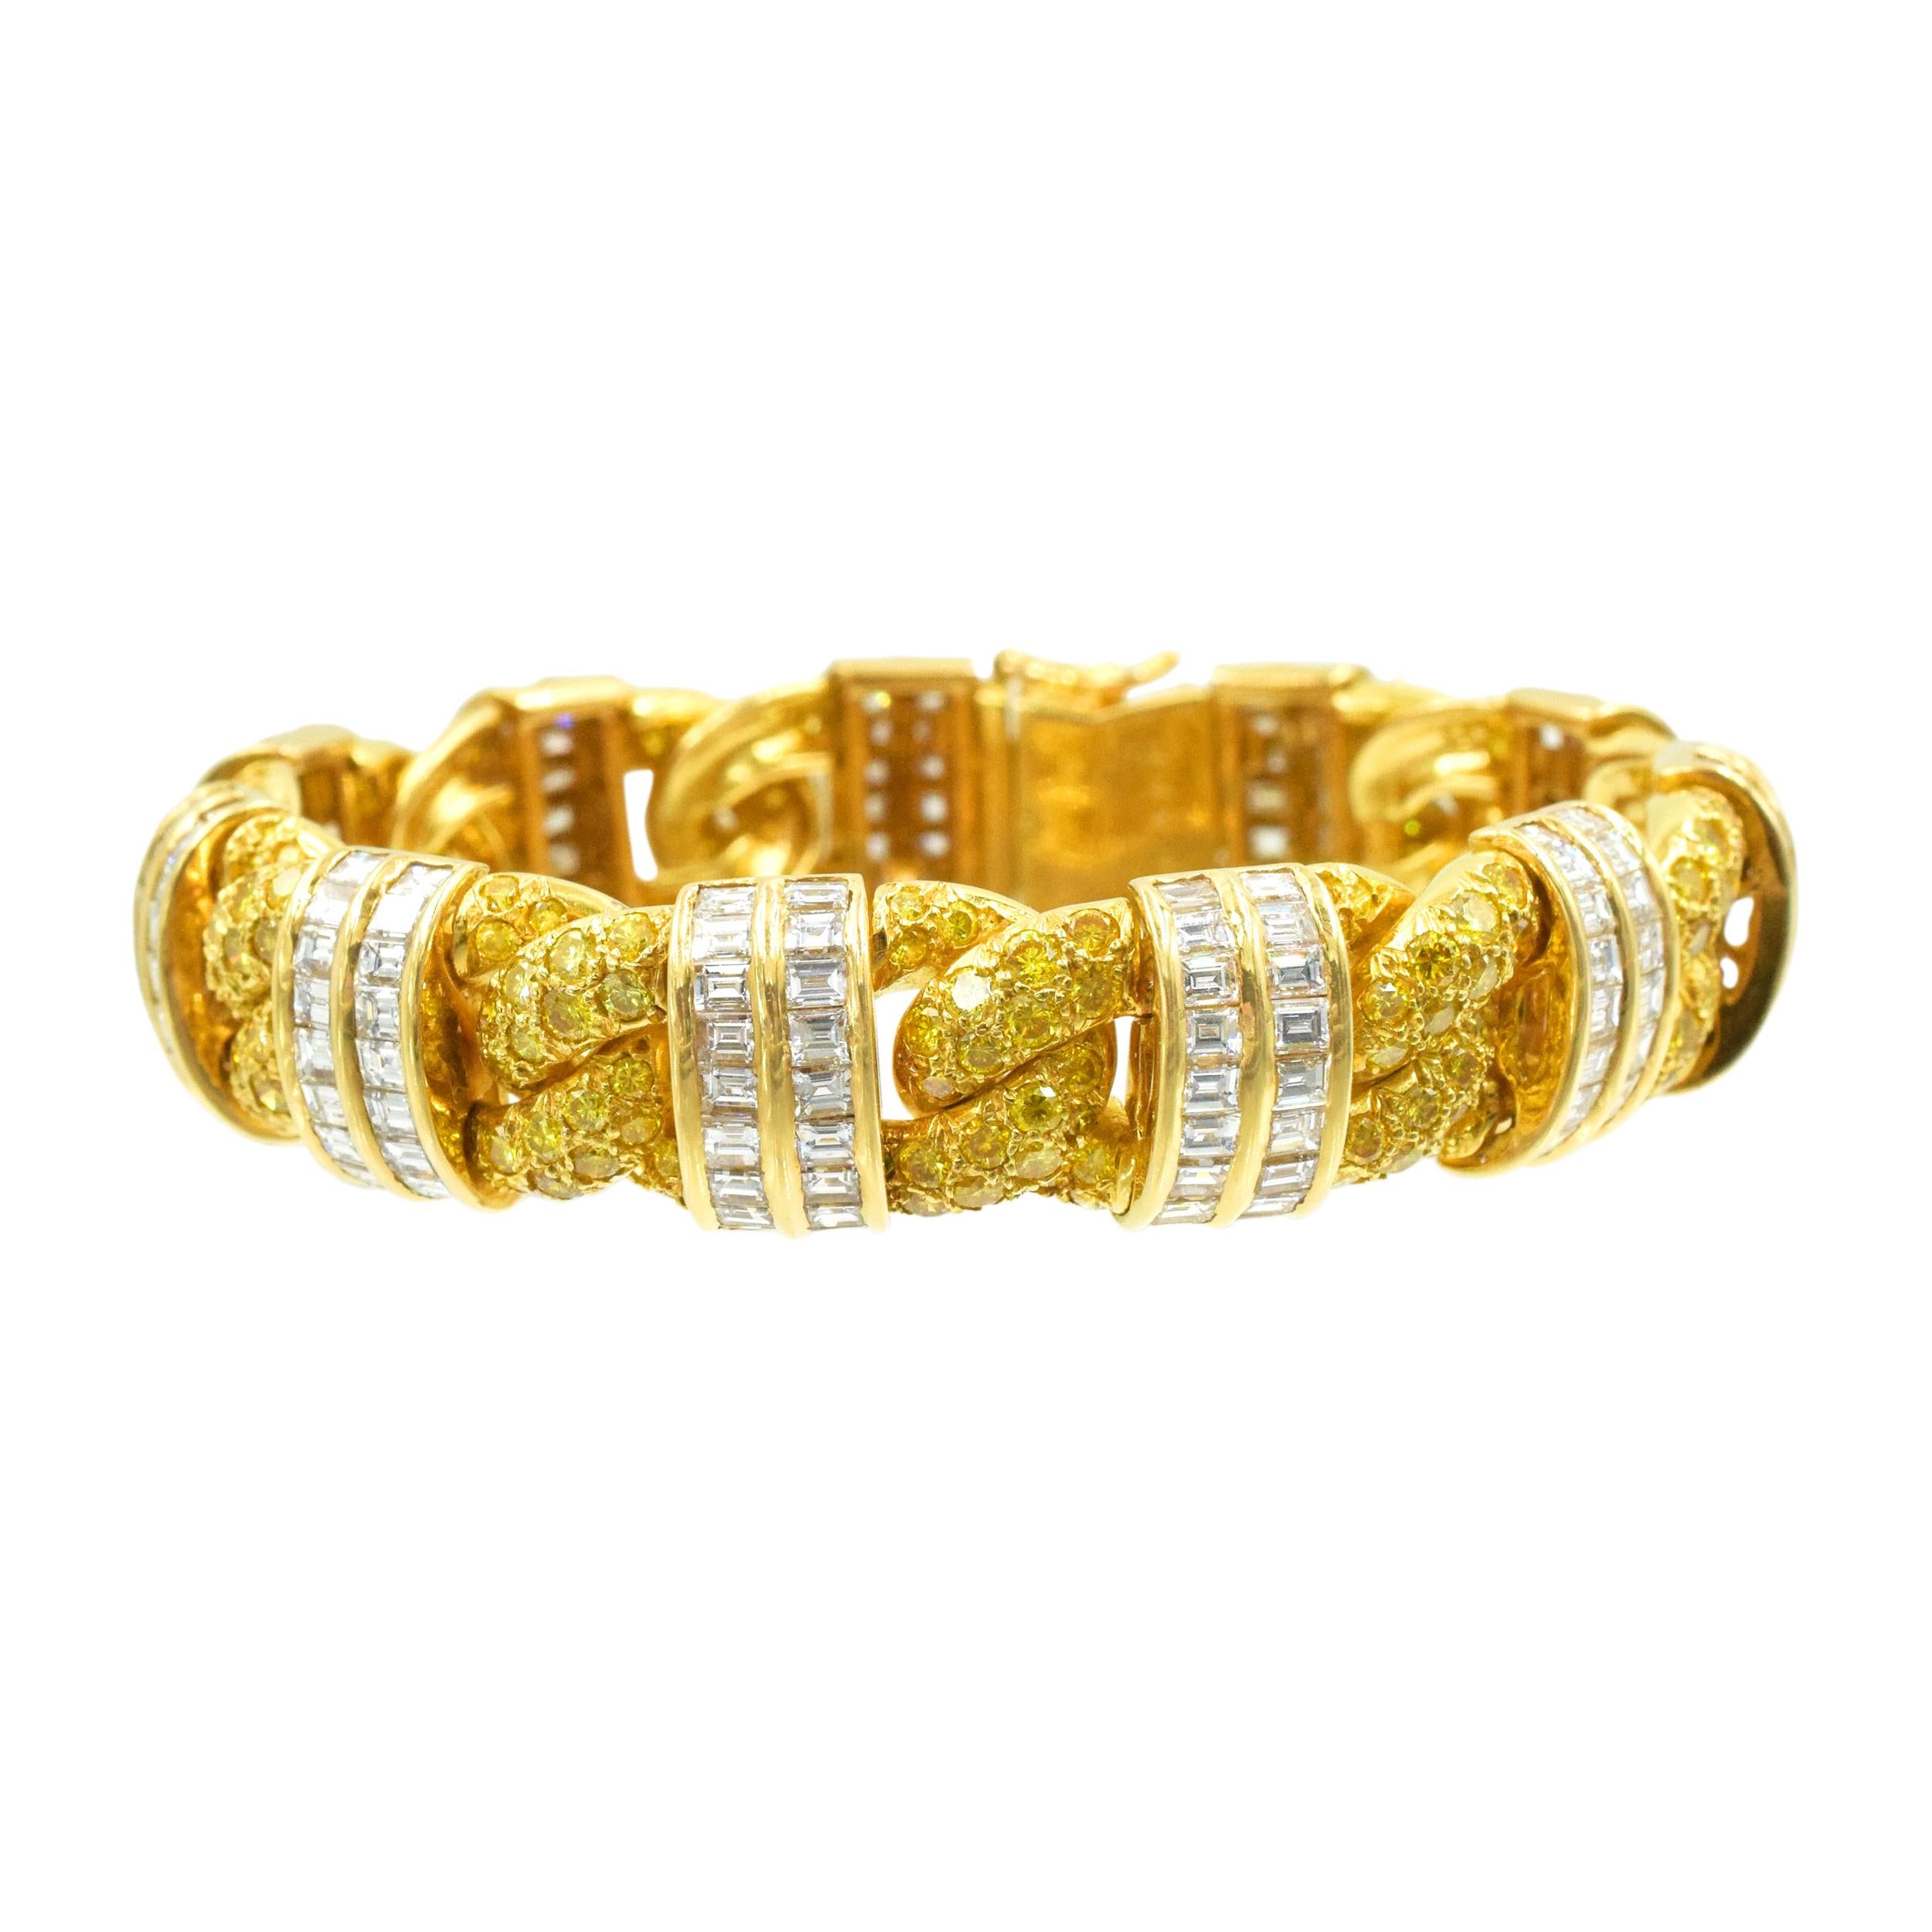 GRAFF
 Fancy Intense Yellow and White Diamond Bracelet This bracelet has 233 fancy intense yellow diamonds weighing approximately 7 carats and 196 baguette shape diamonds weighing approximately 10 carats all set in 18k yellow gold. 
Inscribed: